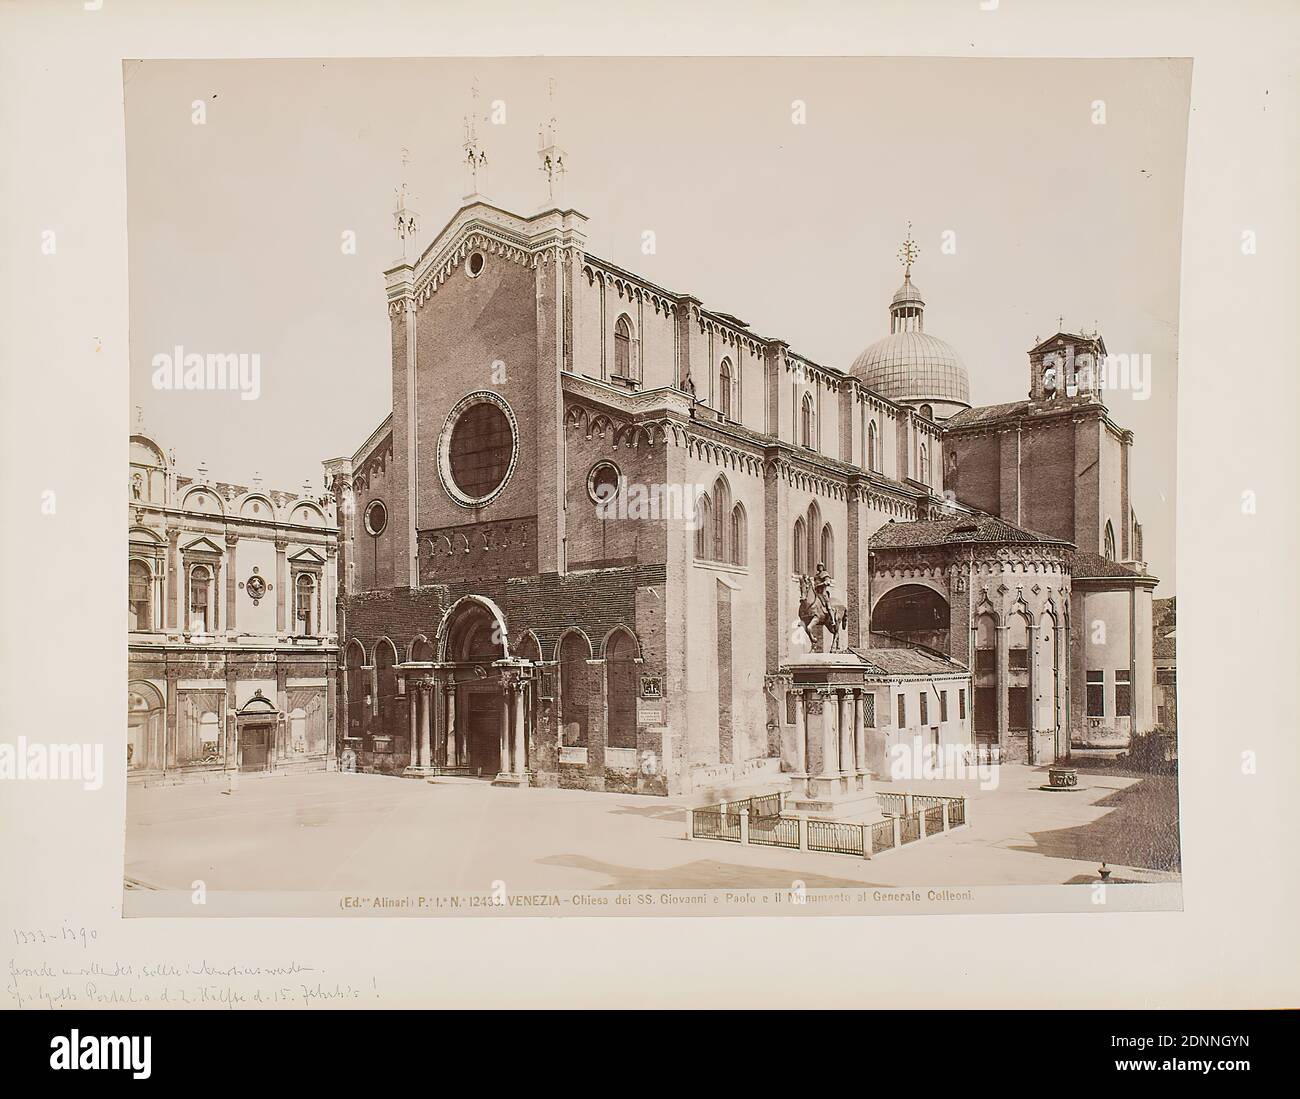 Santi Giovanni e Paolo (San Zanipolo), Venice, albumin paper, black and white positive process, image size: height: 20,40 cm; width: 25,20 cm, VENEZIA - Chiesa dei SS. Giovanni e Paolo e il Monumento al Generale Colleoni. Marked with lead recto on the cardboard: 1333 - 1390, facade unfinished, should be instructed. Late Gothic. Portal on the 2nd half of the 15th century!, travel photography, architectural photography, architecture, exterior of a church, hist. building, locality, street, Venice Stock Photo